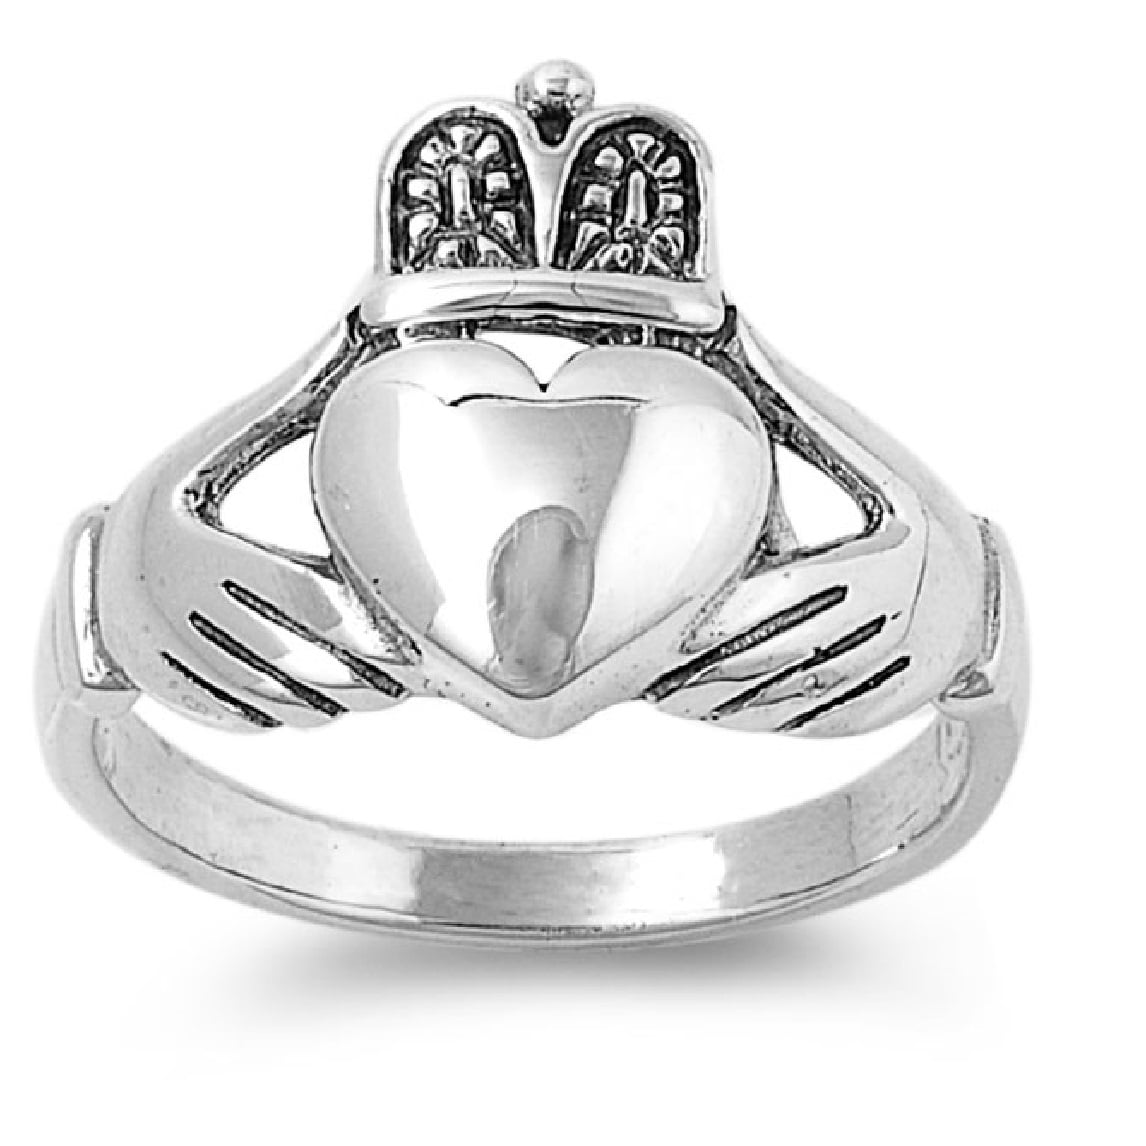 All in Stock 925 Sterling Silver Love Loyalty Friendship Claddagh